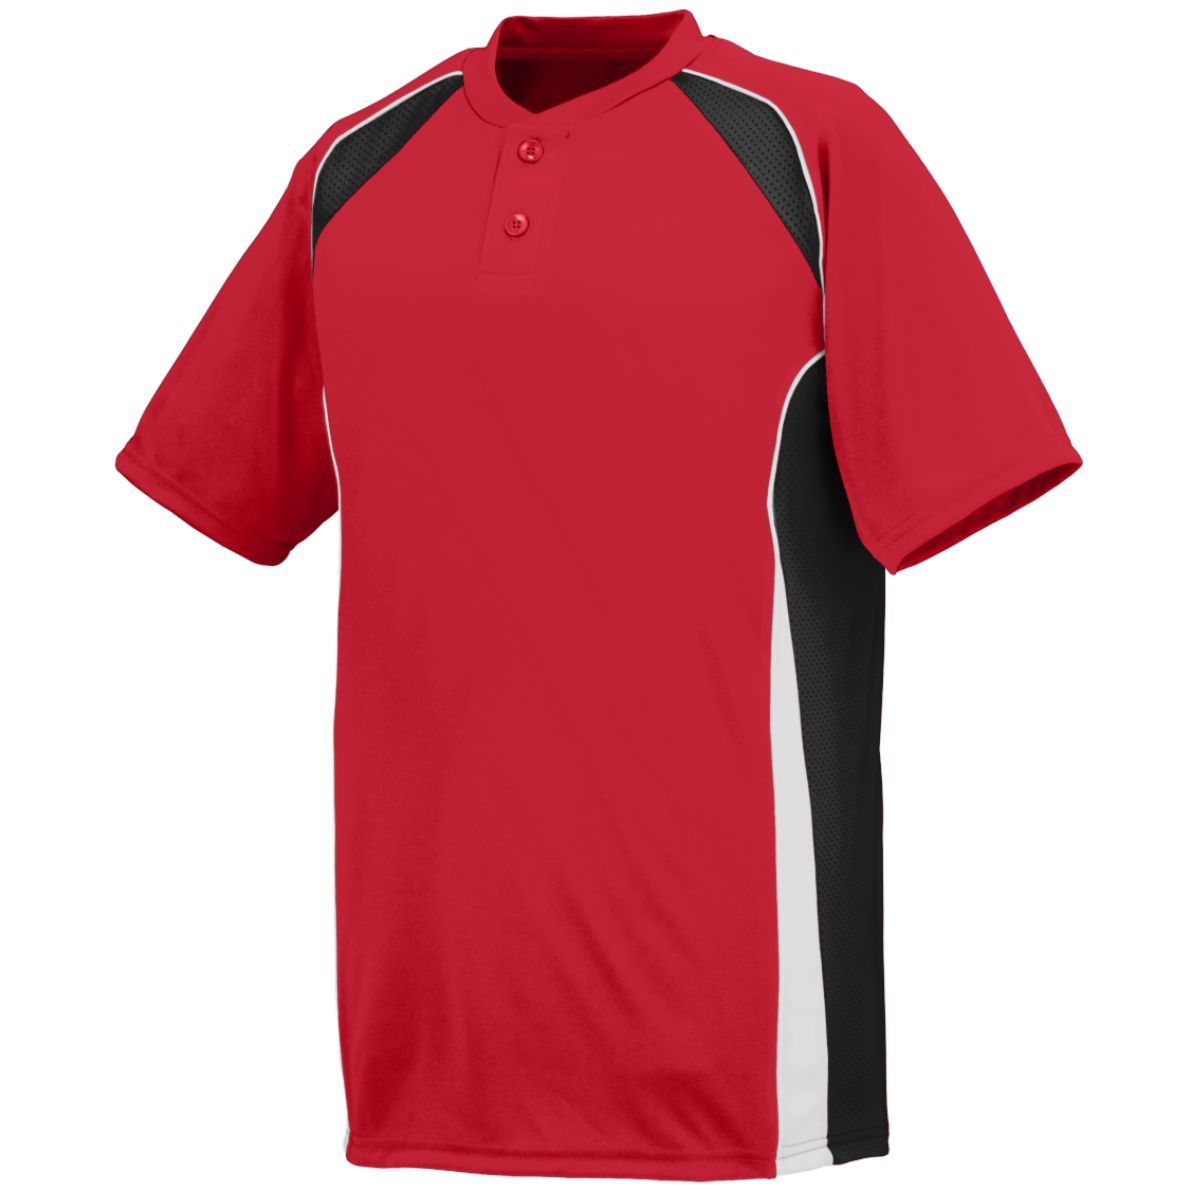 Augusta Sportswear Base Hit Jersey in Red/Black/White  -Part of the Adult, Adult-Jersey, Augusta-Products, Baseball, Shirts, All-Sports, All-Sports-1 product lines at KanaleyCreations.com